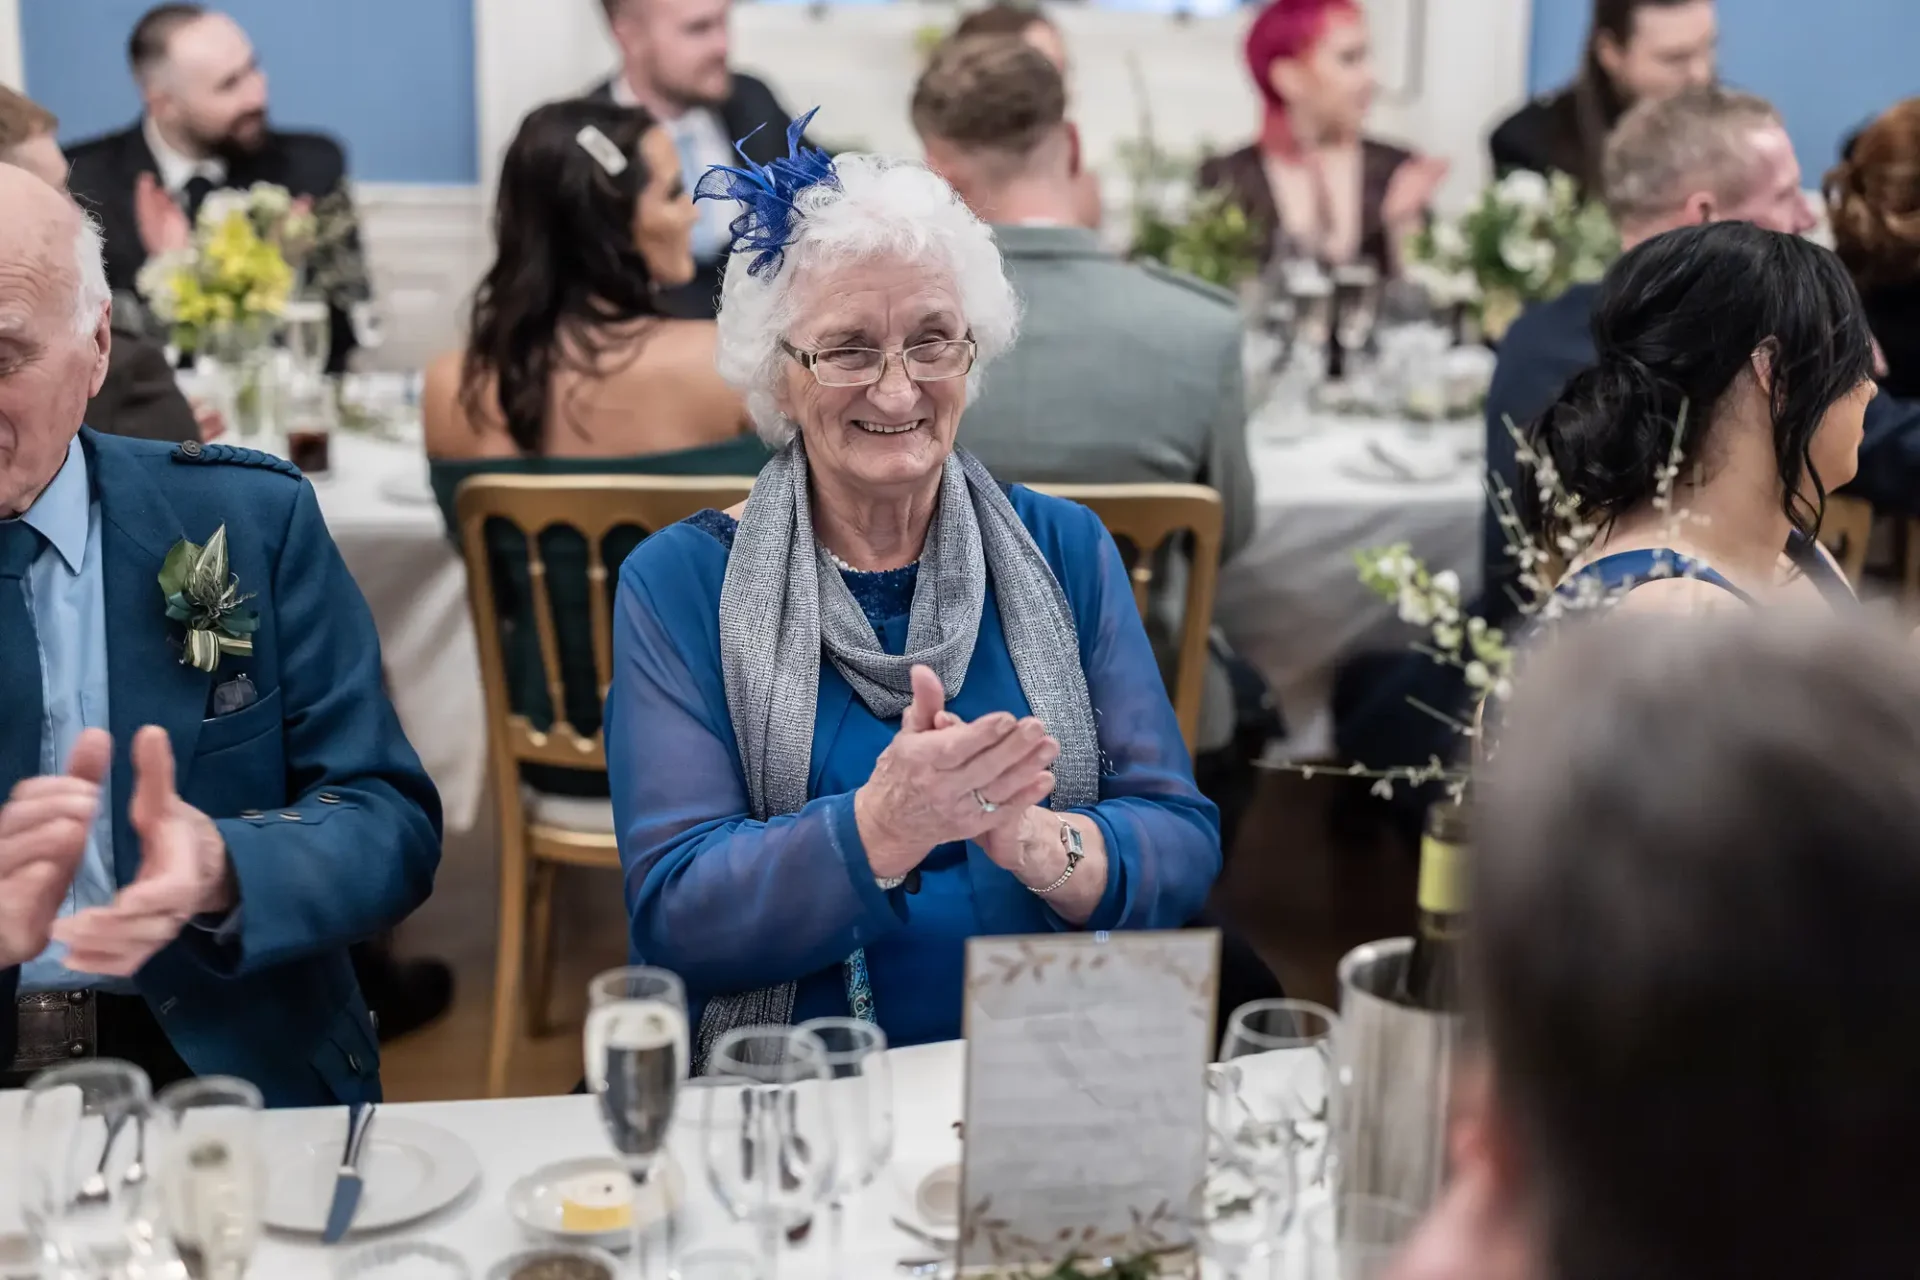 Elderly woman in blue with a feather fascinator smiling and clapping at a wedding reception, surrounded by other guests.